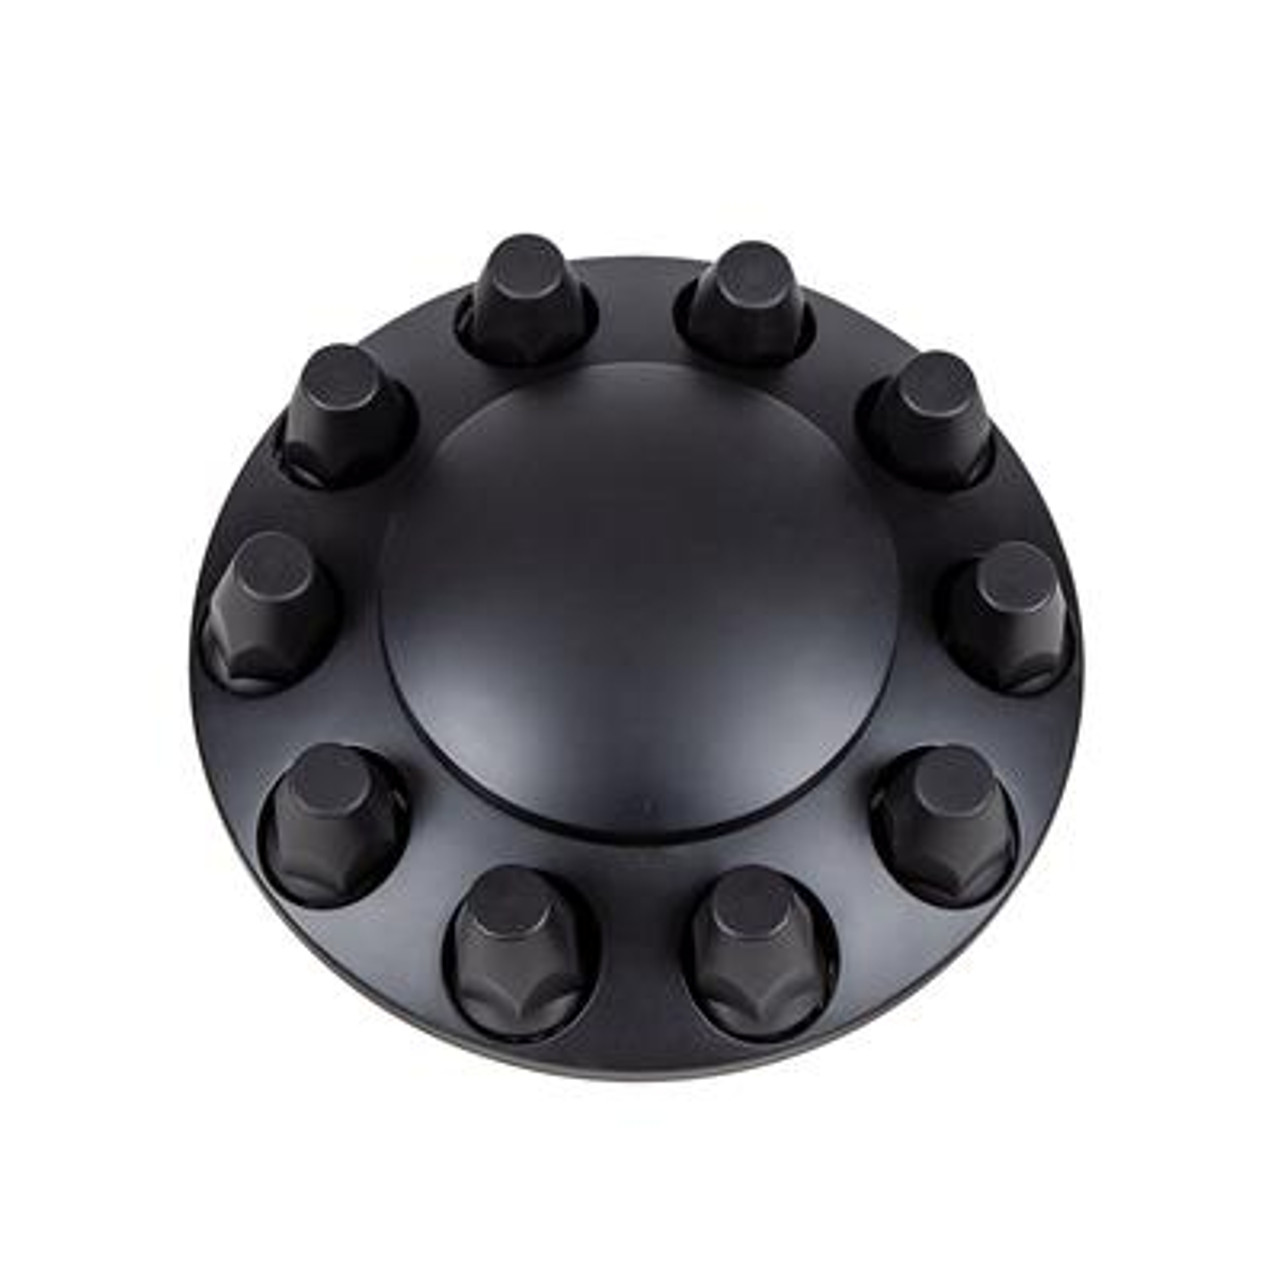 Dome Front Axle Cover With- 33mm Standard Thread-On Nut Covers - Matte Black